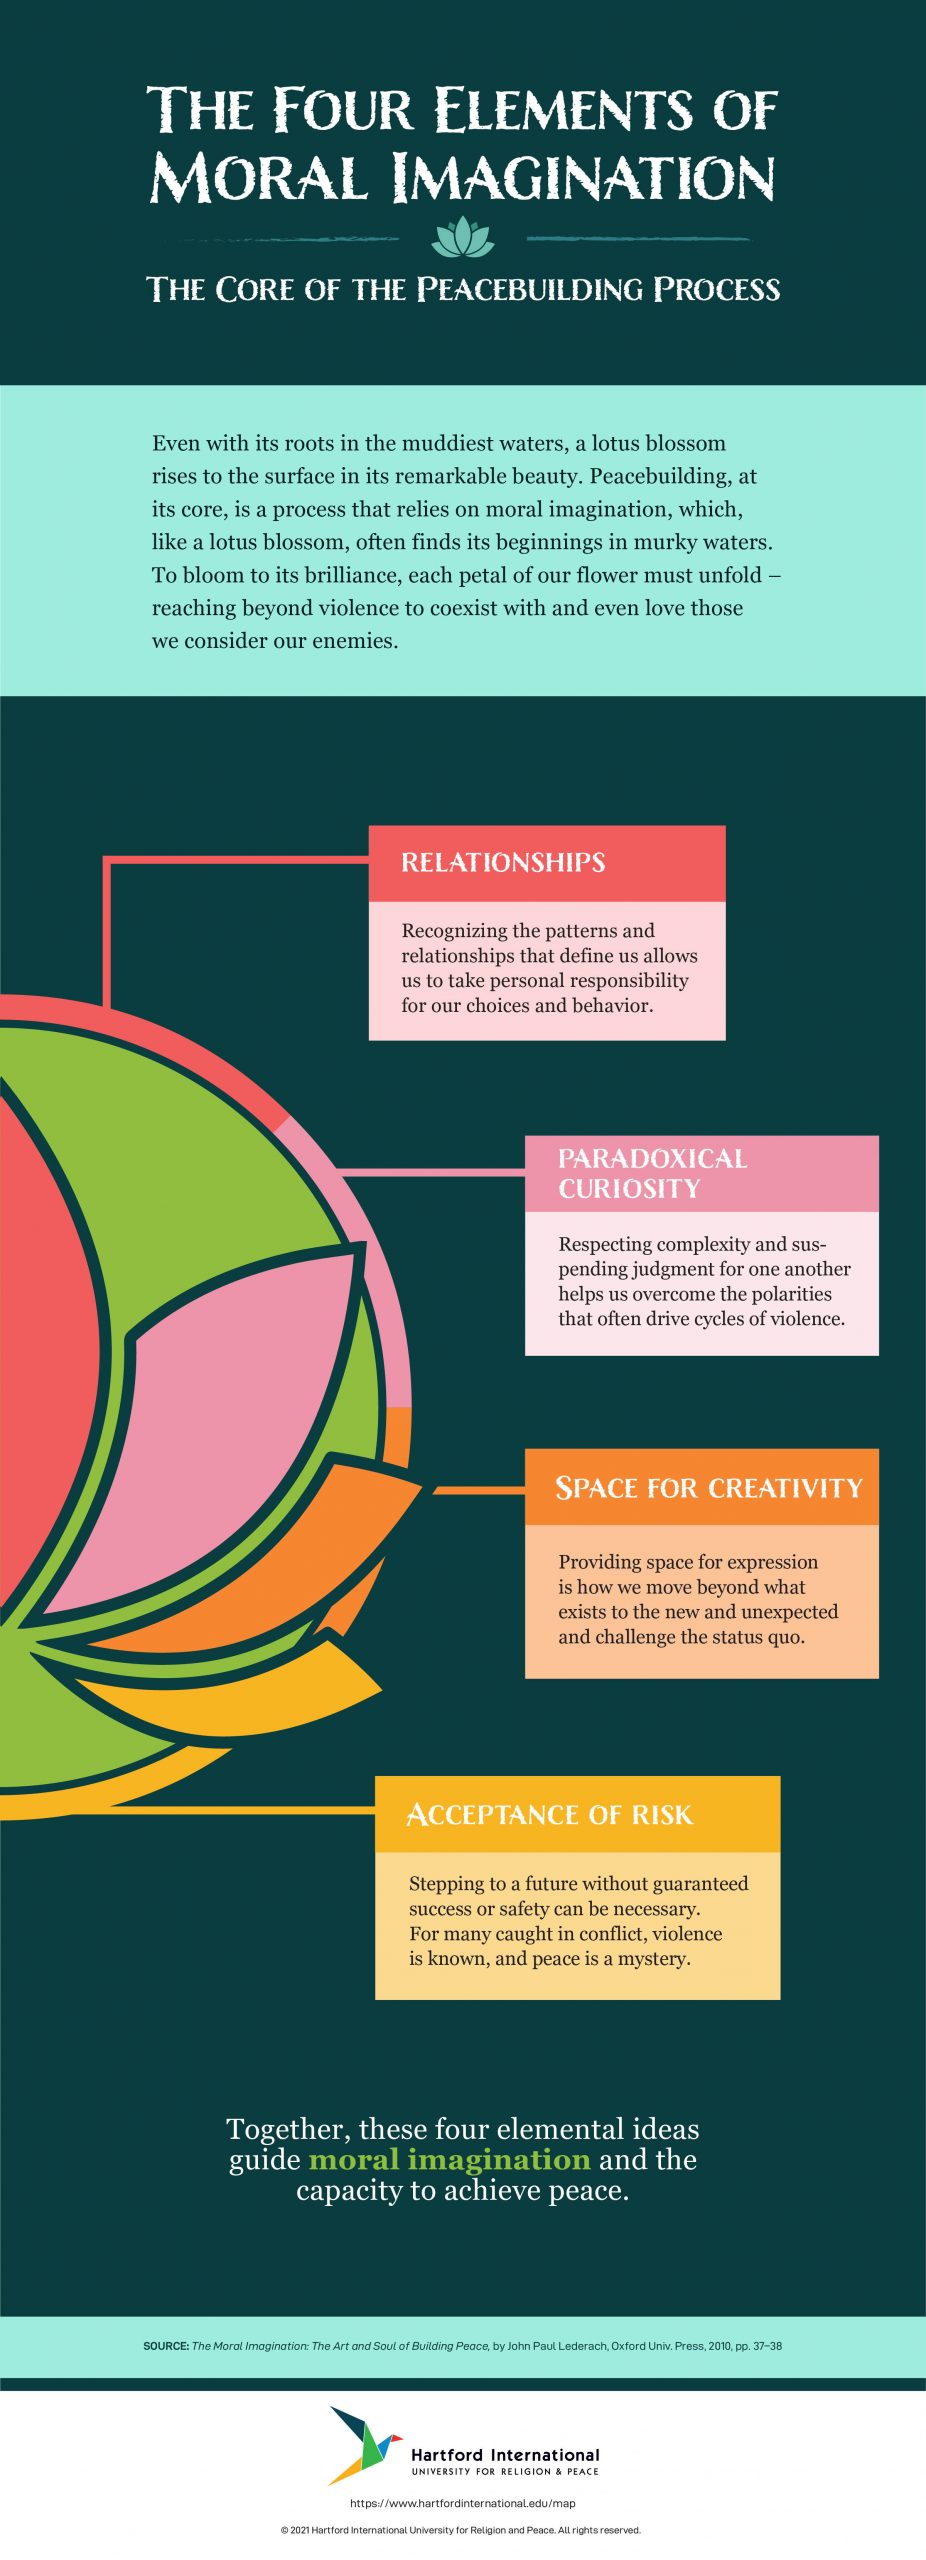 The four elements of moral imagination for peacebuilding infographic